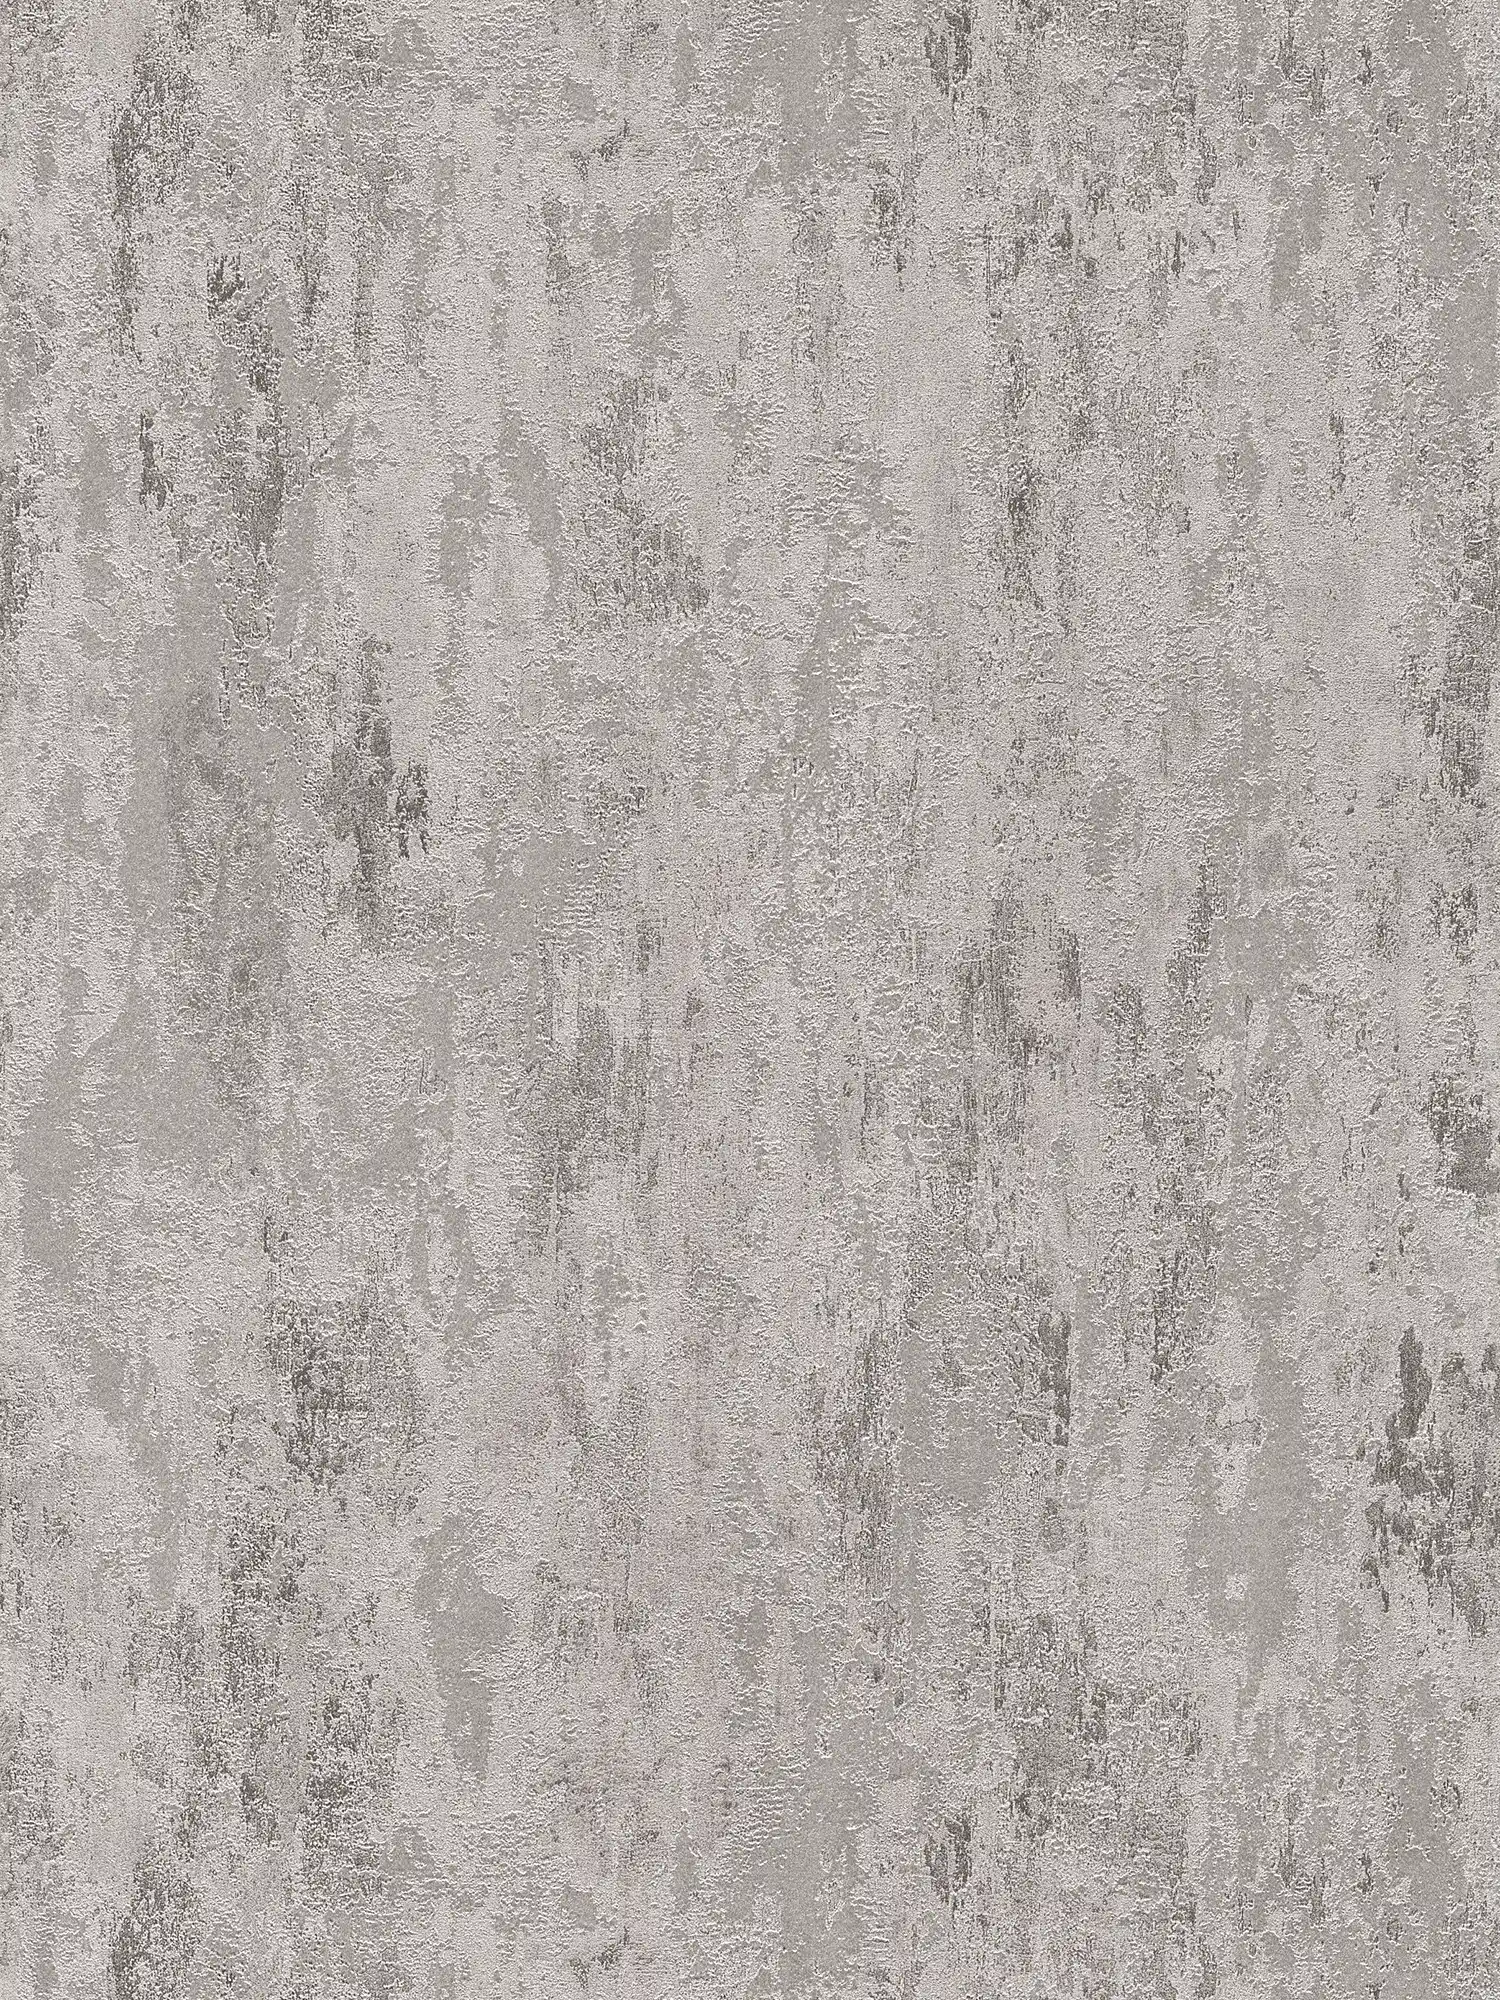 Rust non-woven wallpaper with textured pattern - grey, silver
